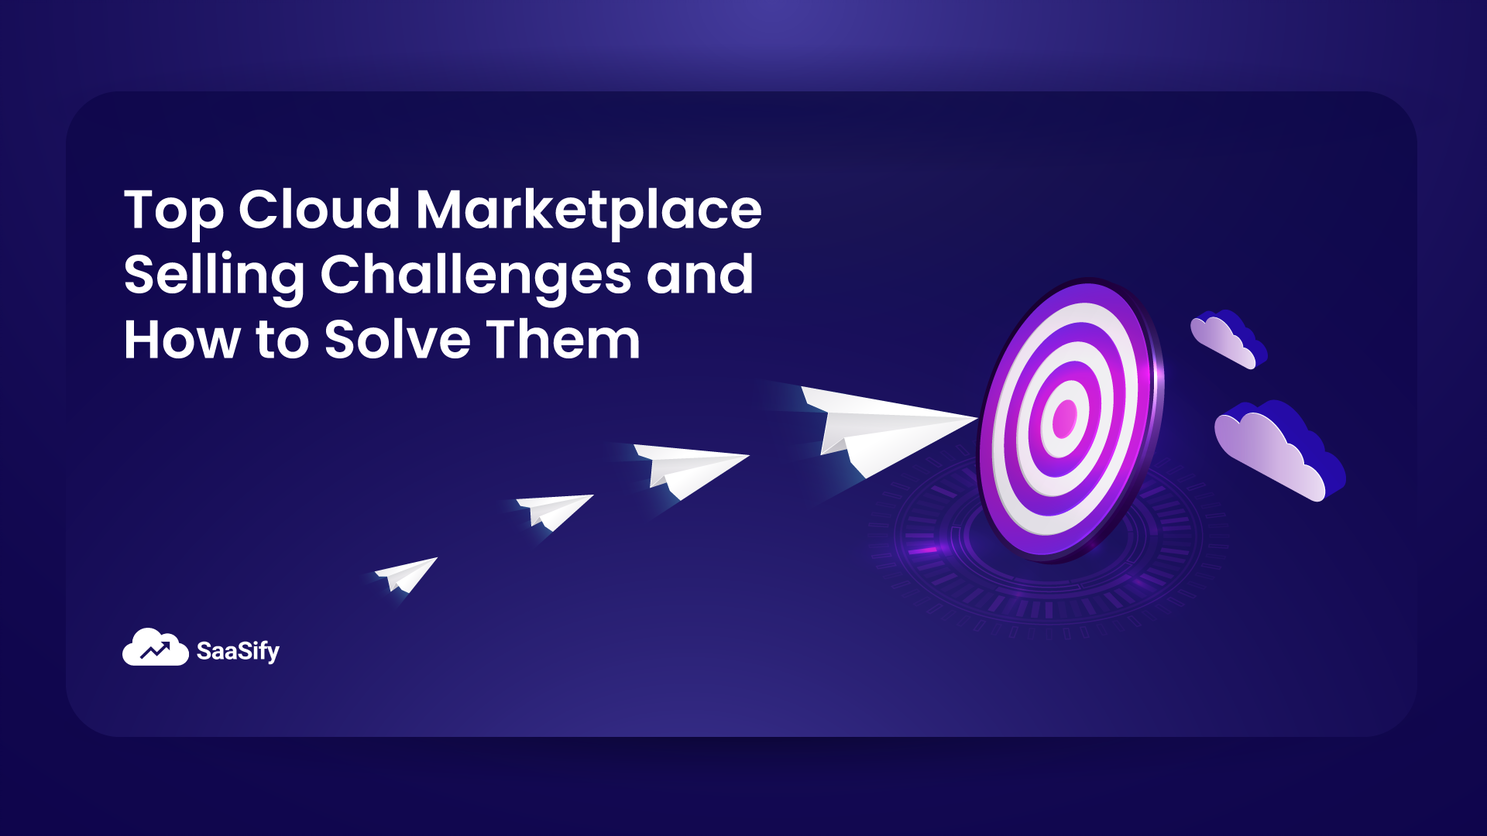 Top 5 Cloud Marketplace Selling Challenges and How to Solve Them